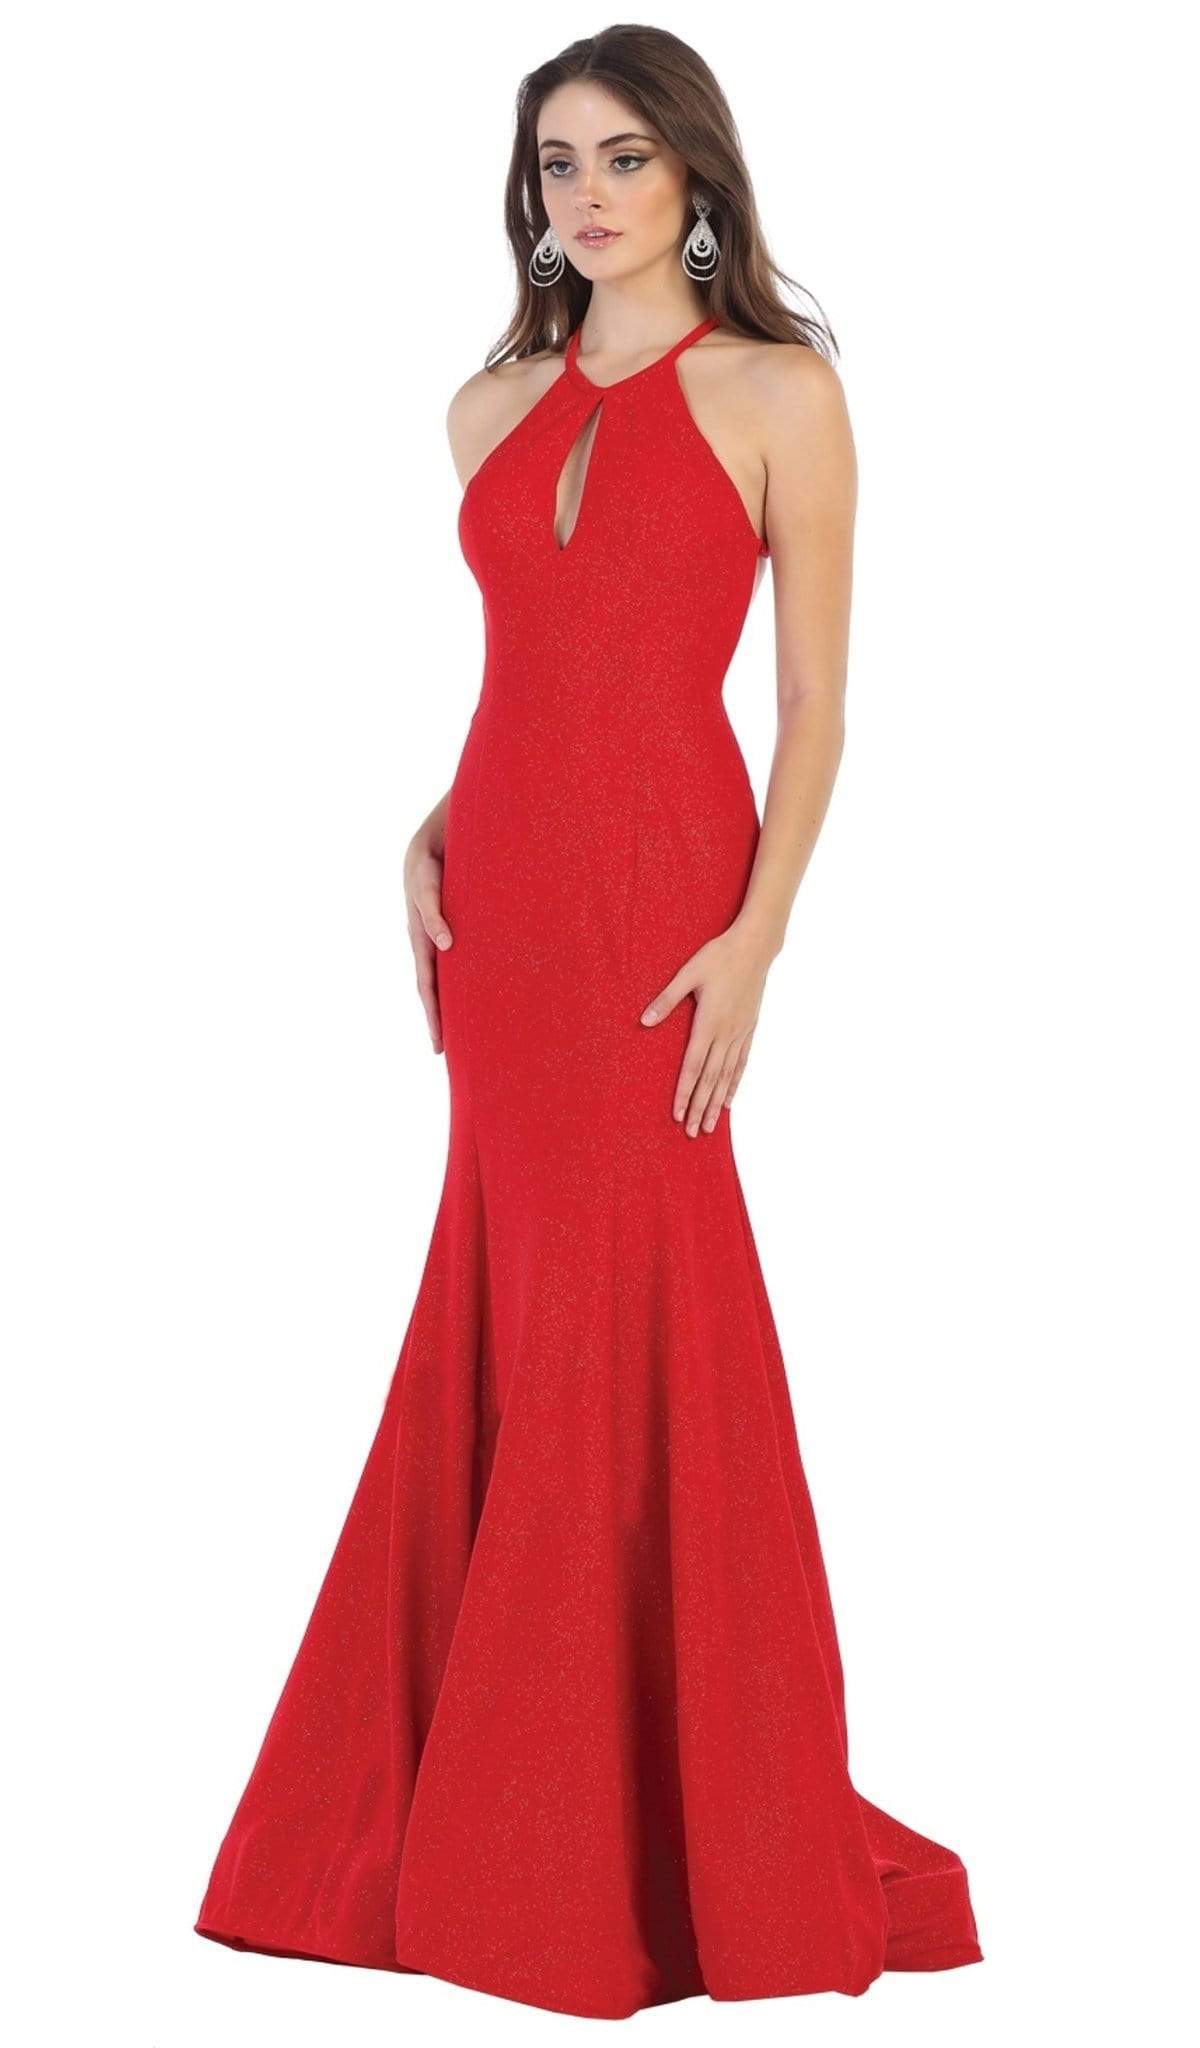 May Queen - MQ1603 Cutout Bodice Halter Mermaid Gown Special Occasion Dress 2 / Red